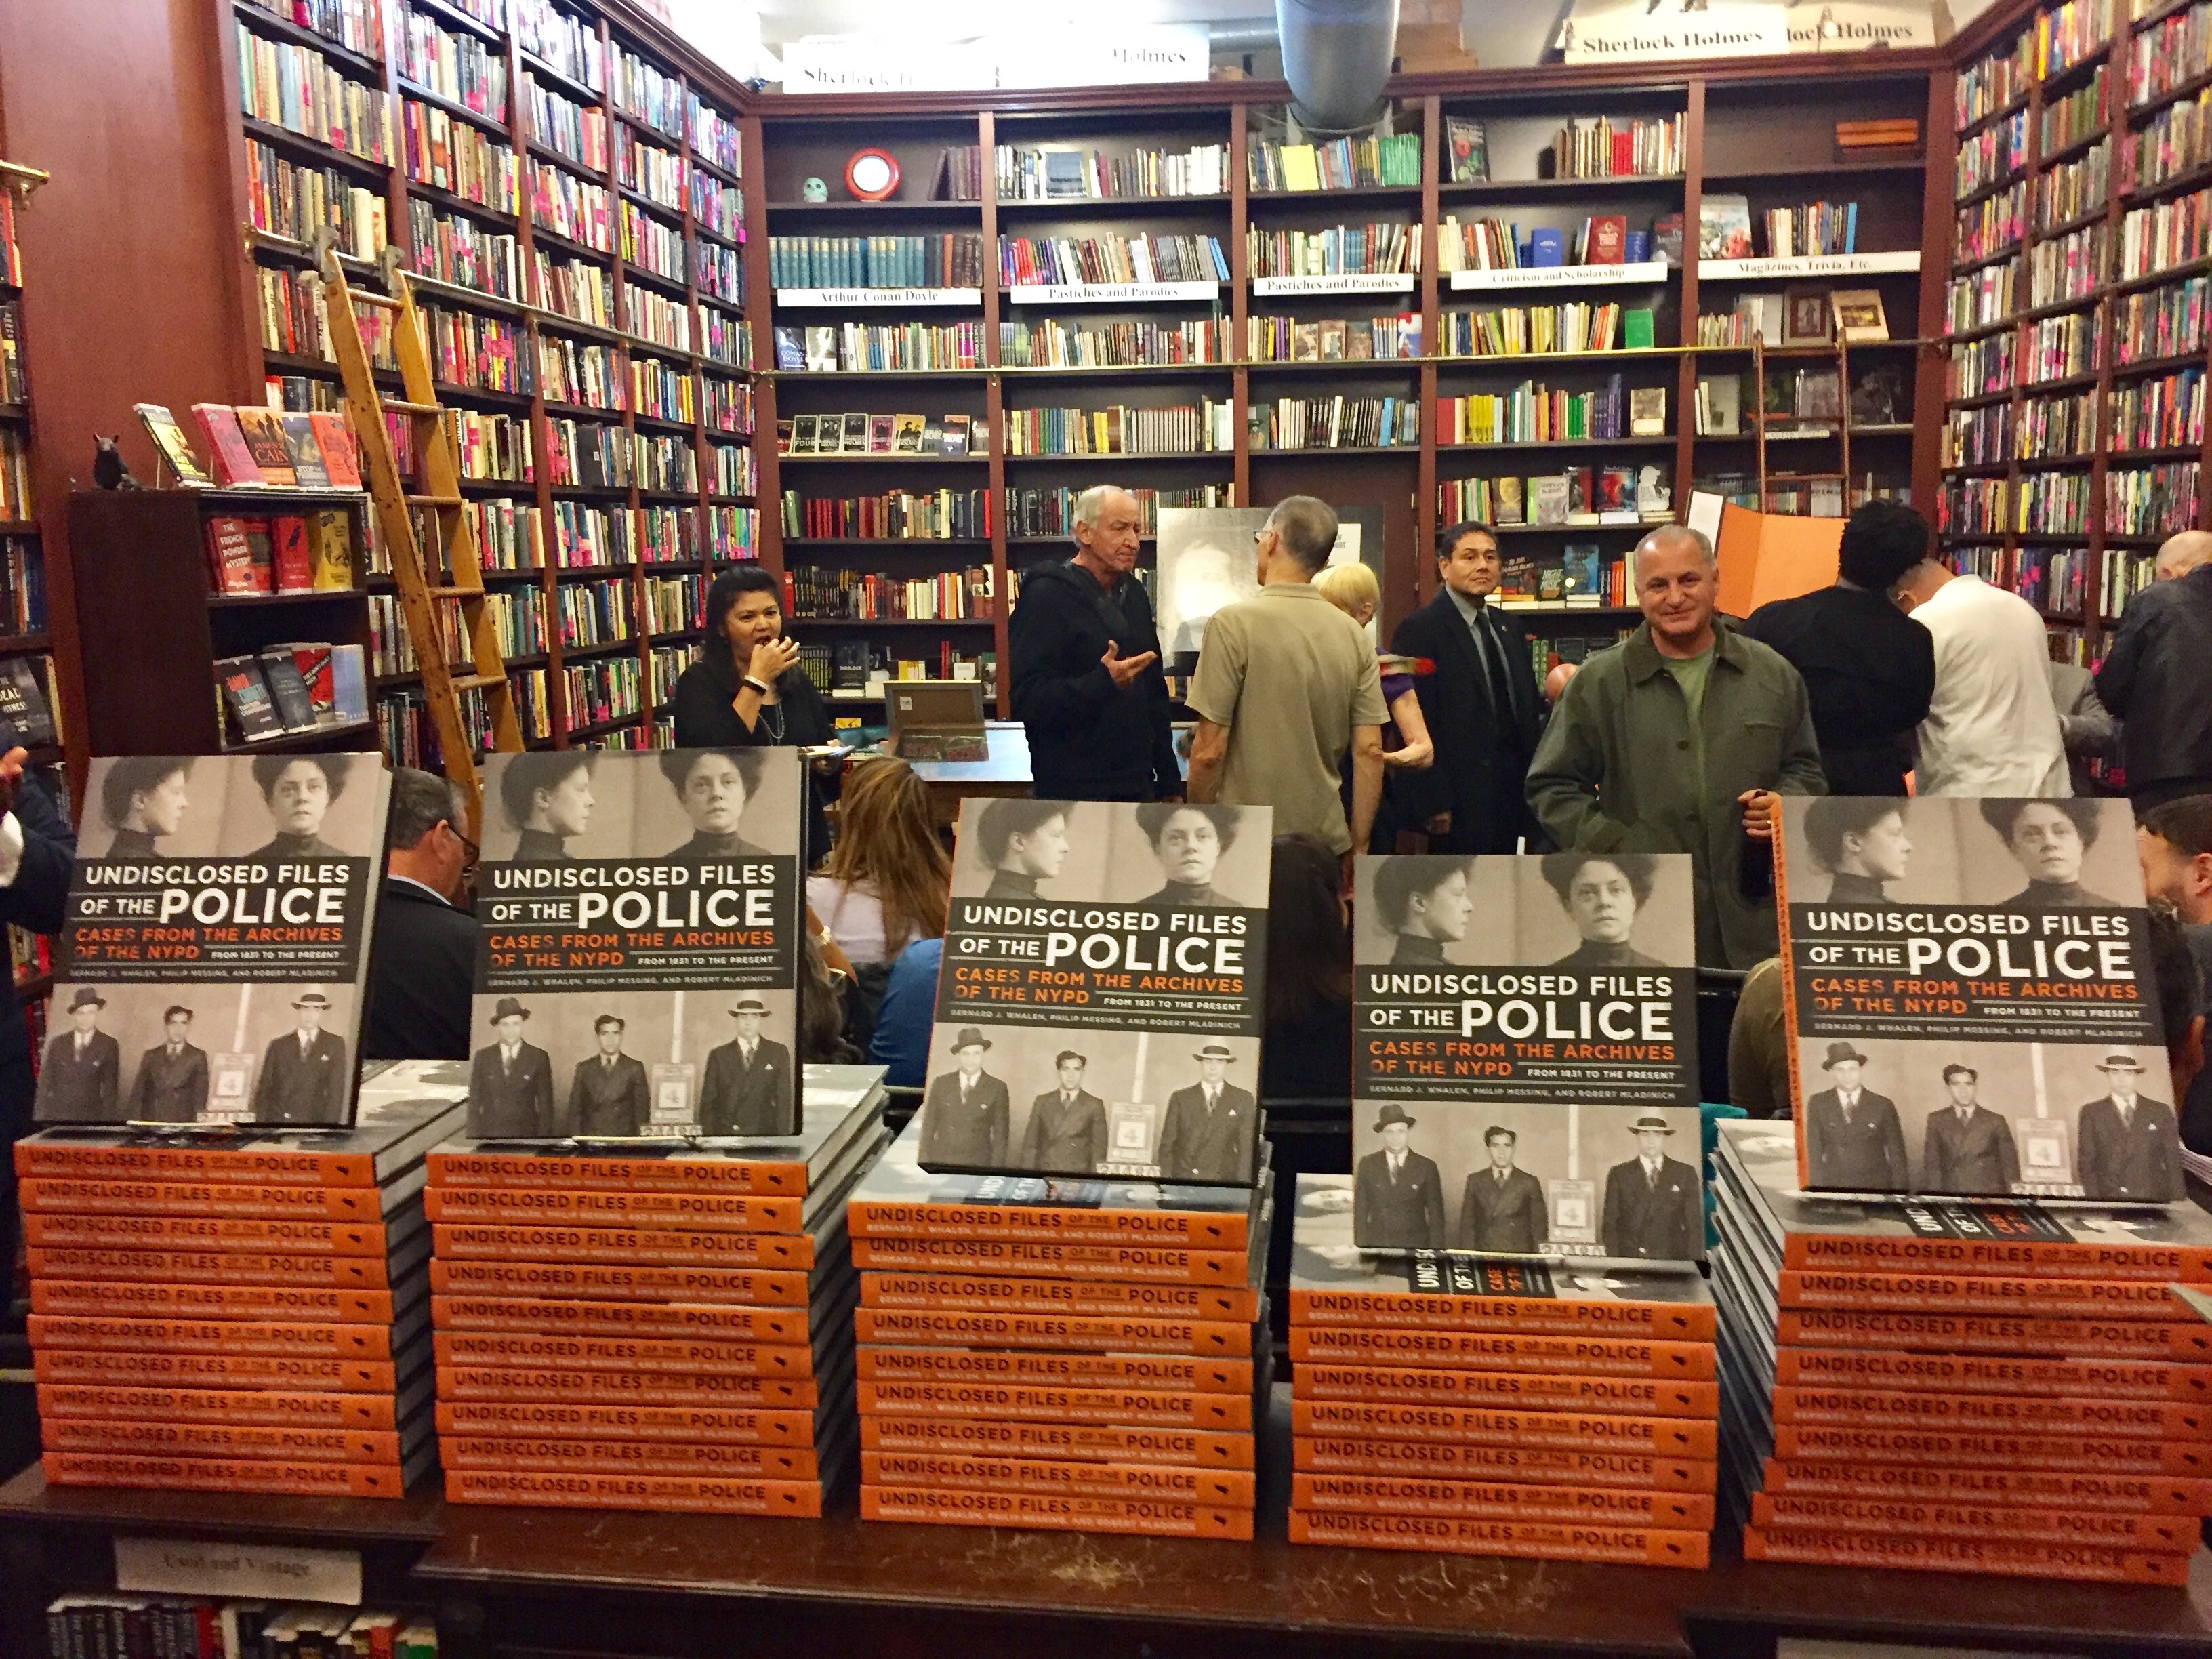 Book Launch held on September 18, 2016 at the Mysterious Book Shop, 58 Warren St., NYC. A HUGE success with overflow crowds!